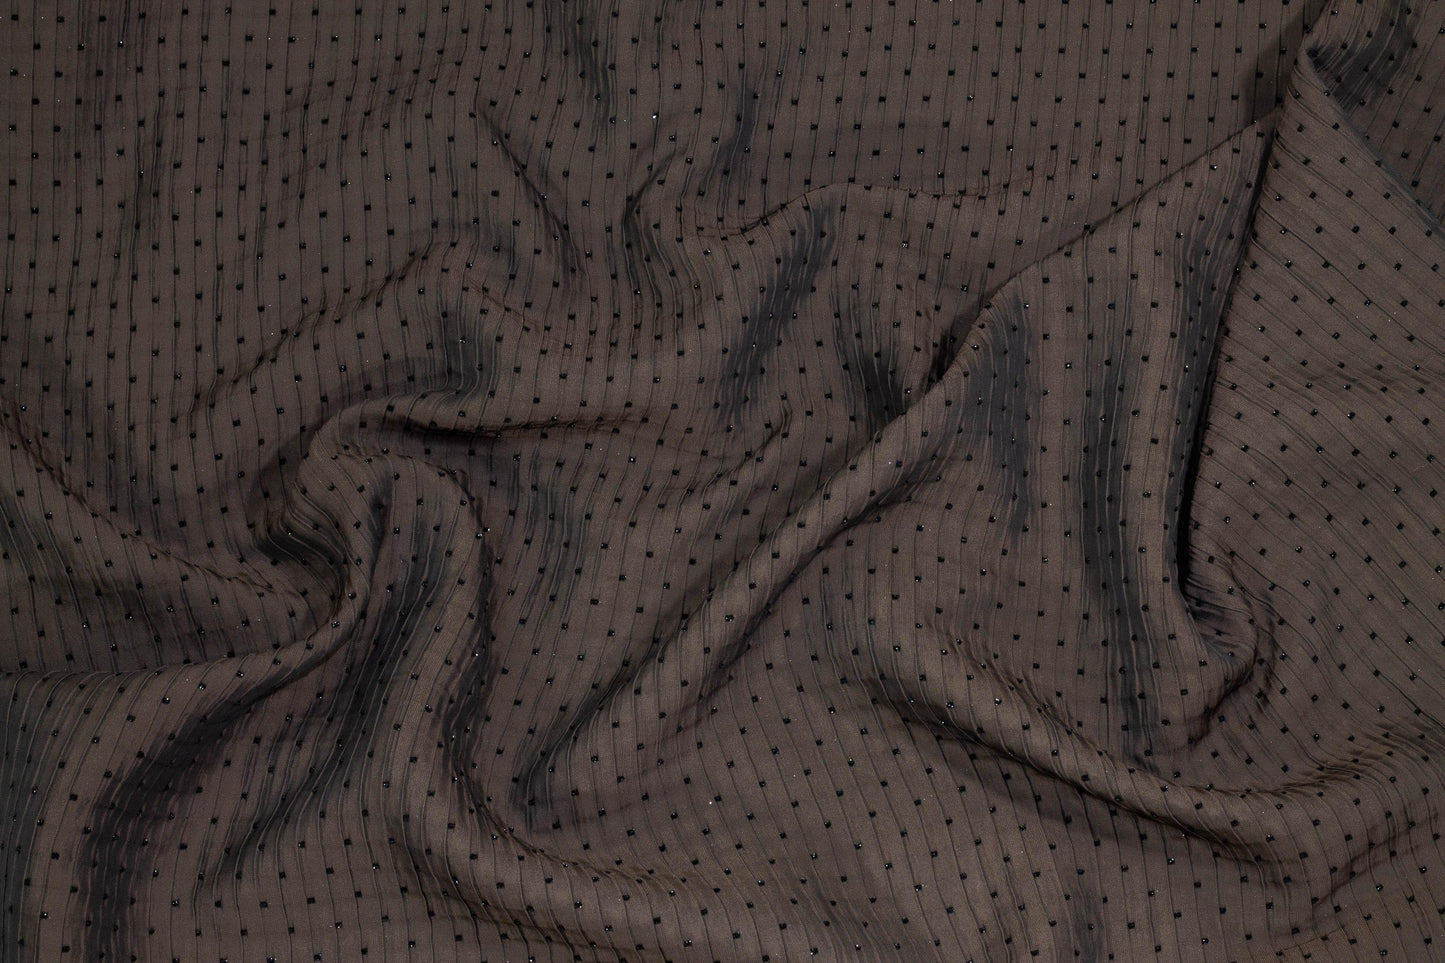 Bistre Brown Crushed Brocade with Embroidered Metallic Polka Dots - Prime Fabrics